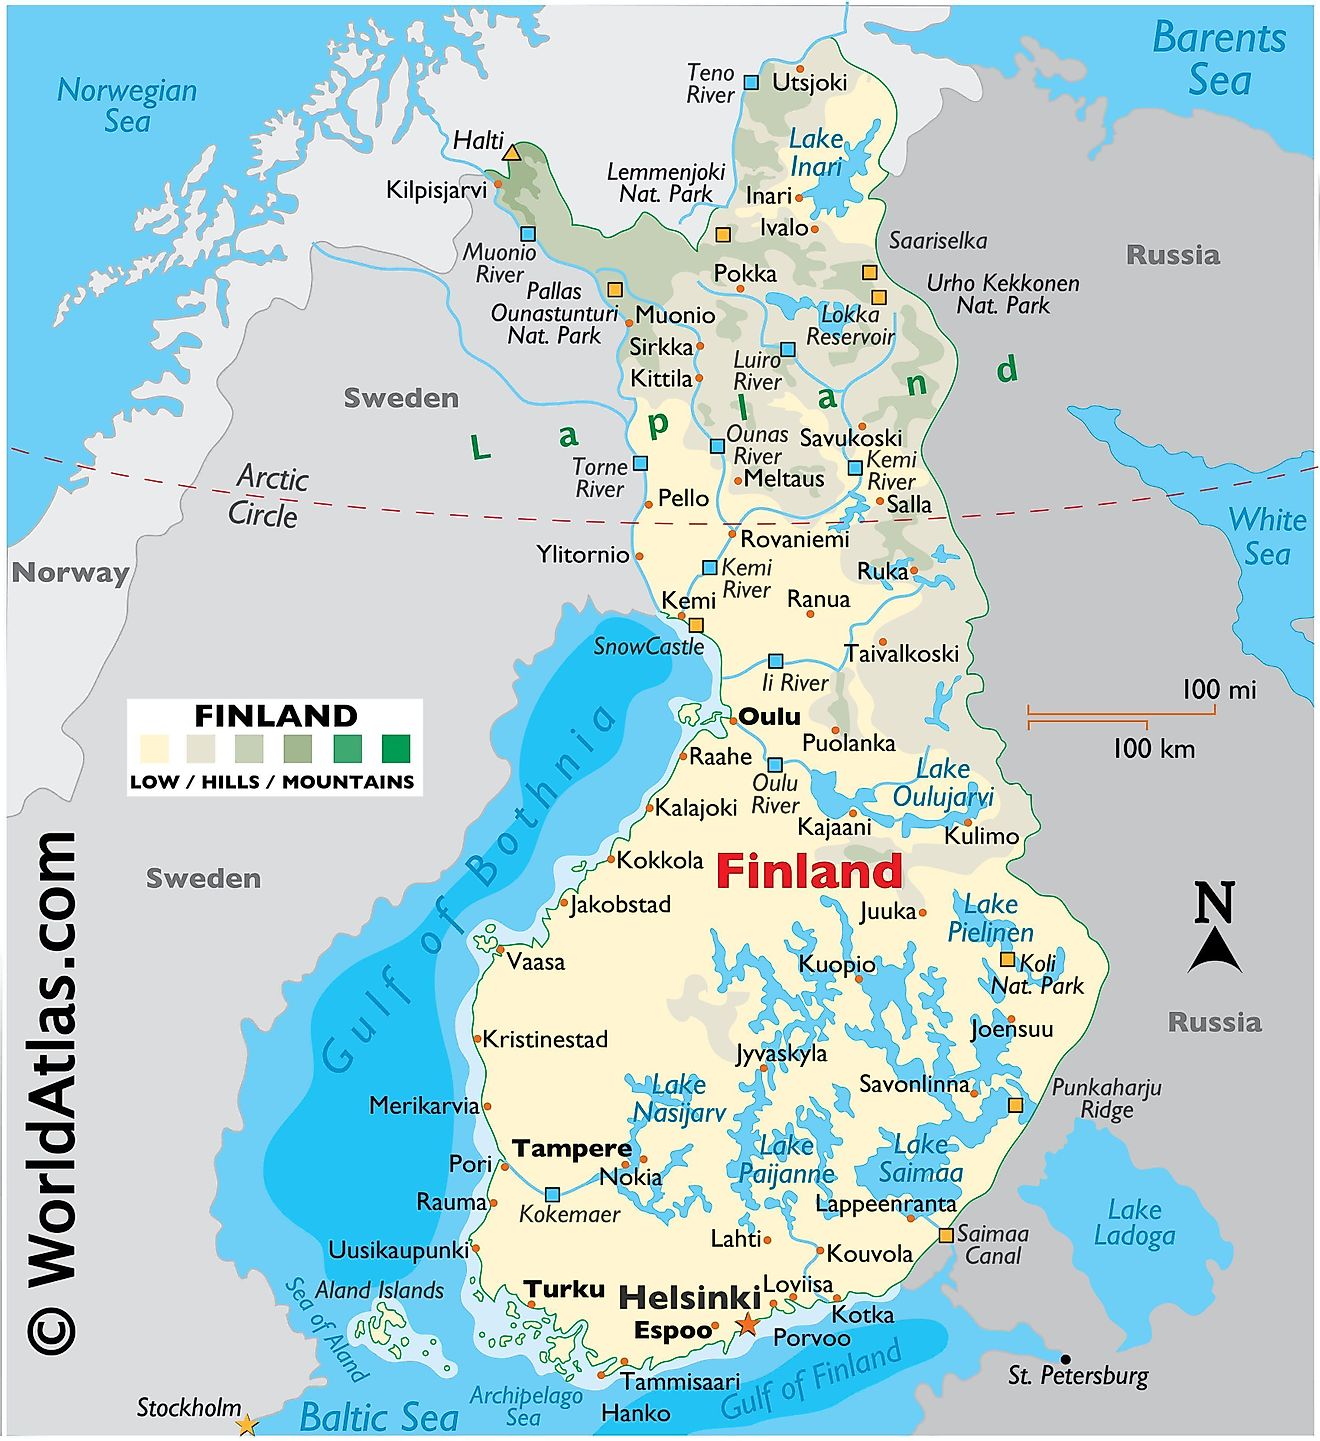 Physical Map of the Finland showing terrain, major lakes and rivers, extreme points, islands, important cities, international boundaries, etc.